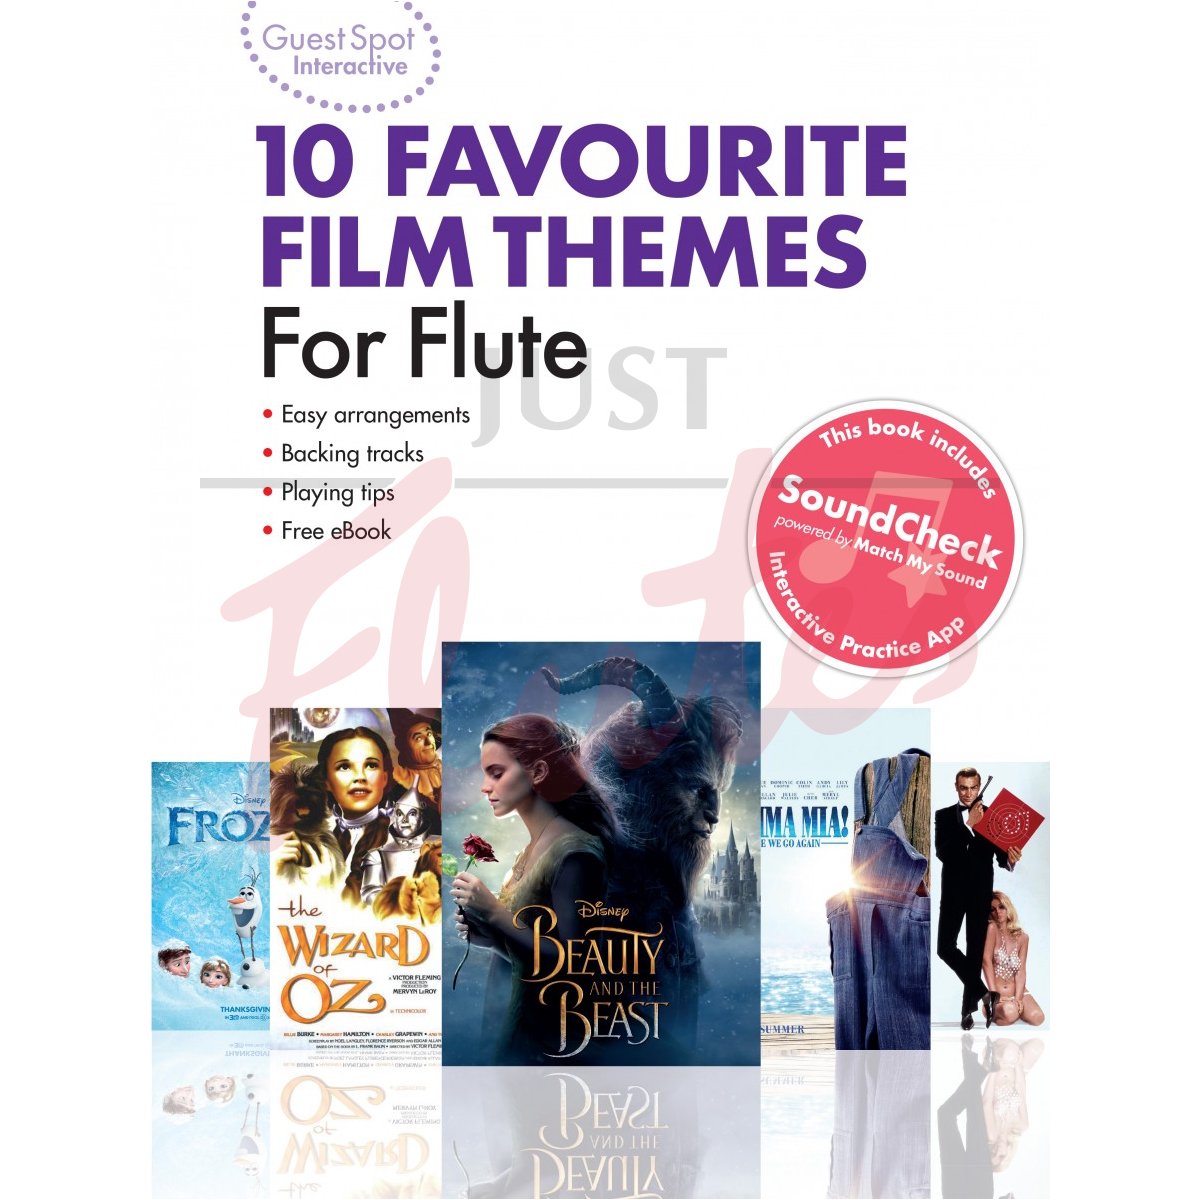 Guest Spot - 10 Favourite Film Themes for Flute